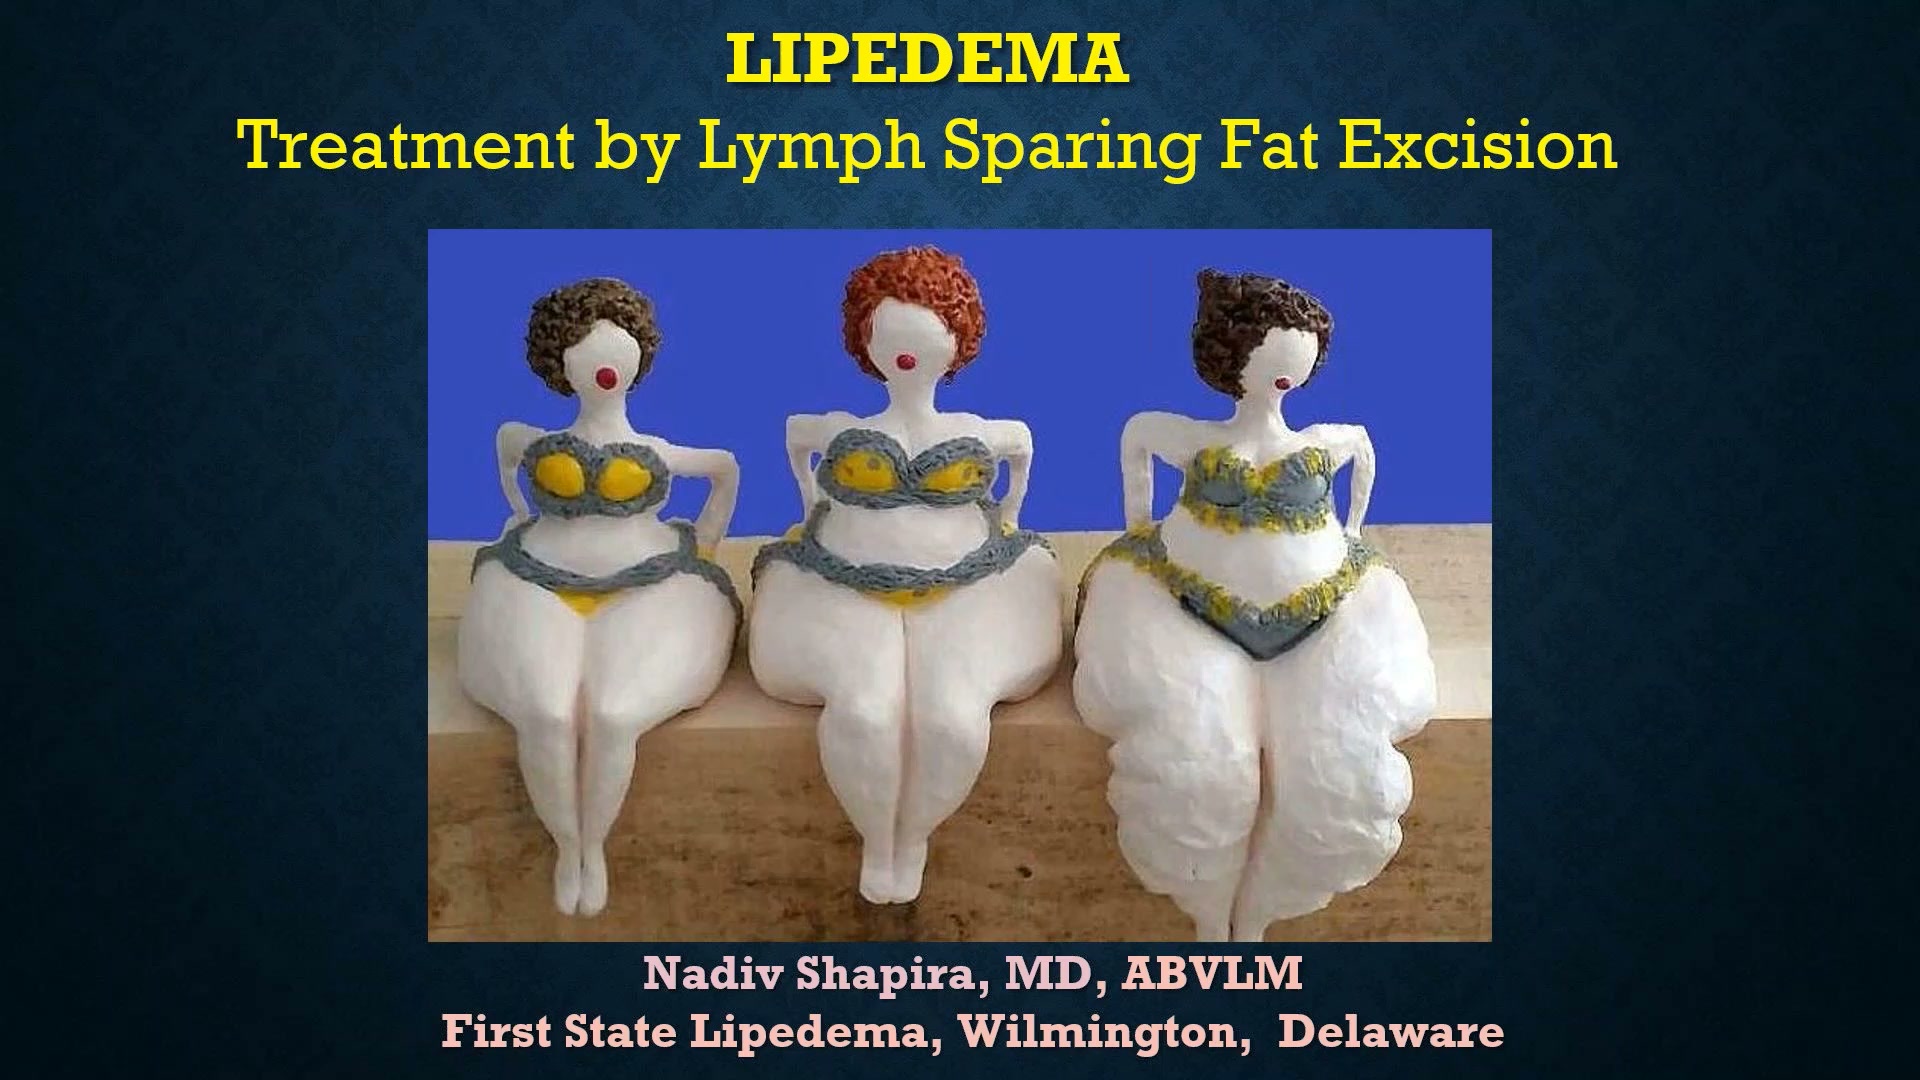 Adopting the WAL Method for Lipedema Patients from Dr Nadiv Shapira